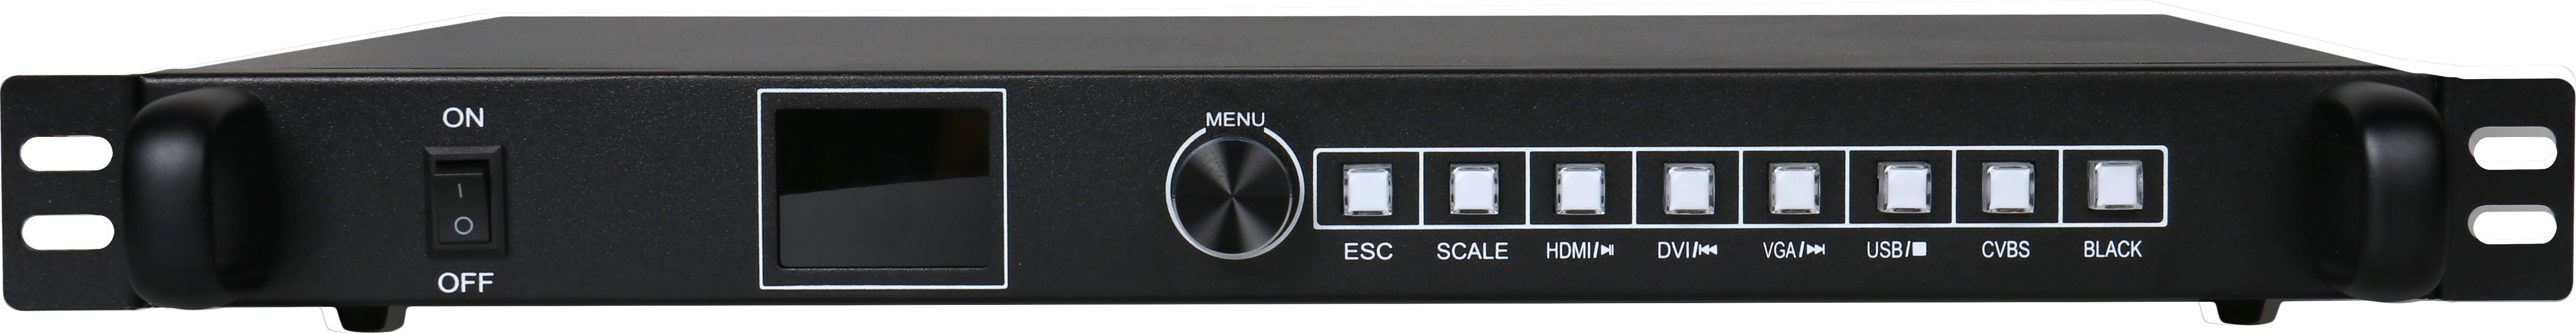 【S Series】2 In 1 S30 Led Video Wall Processor